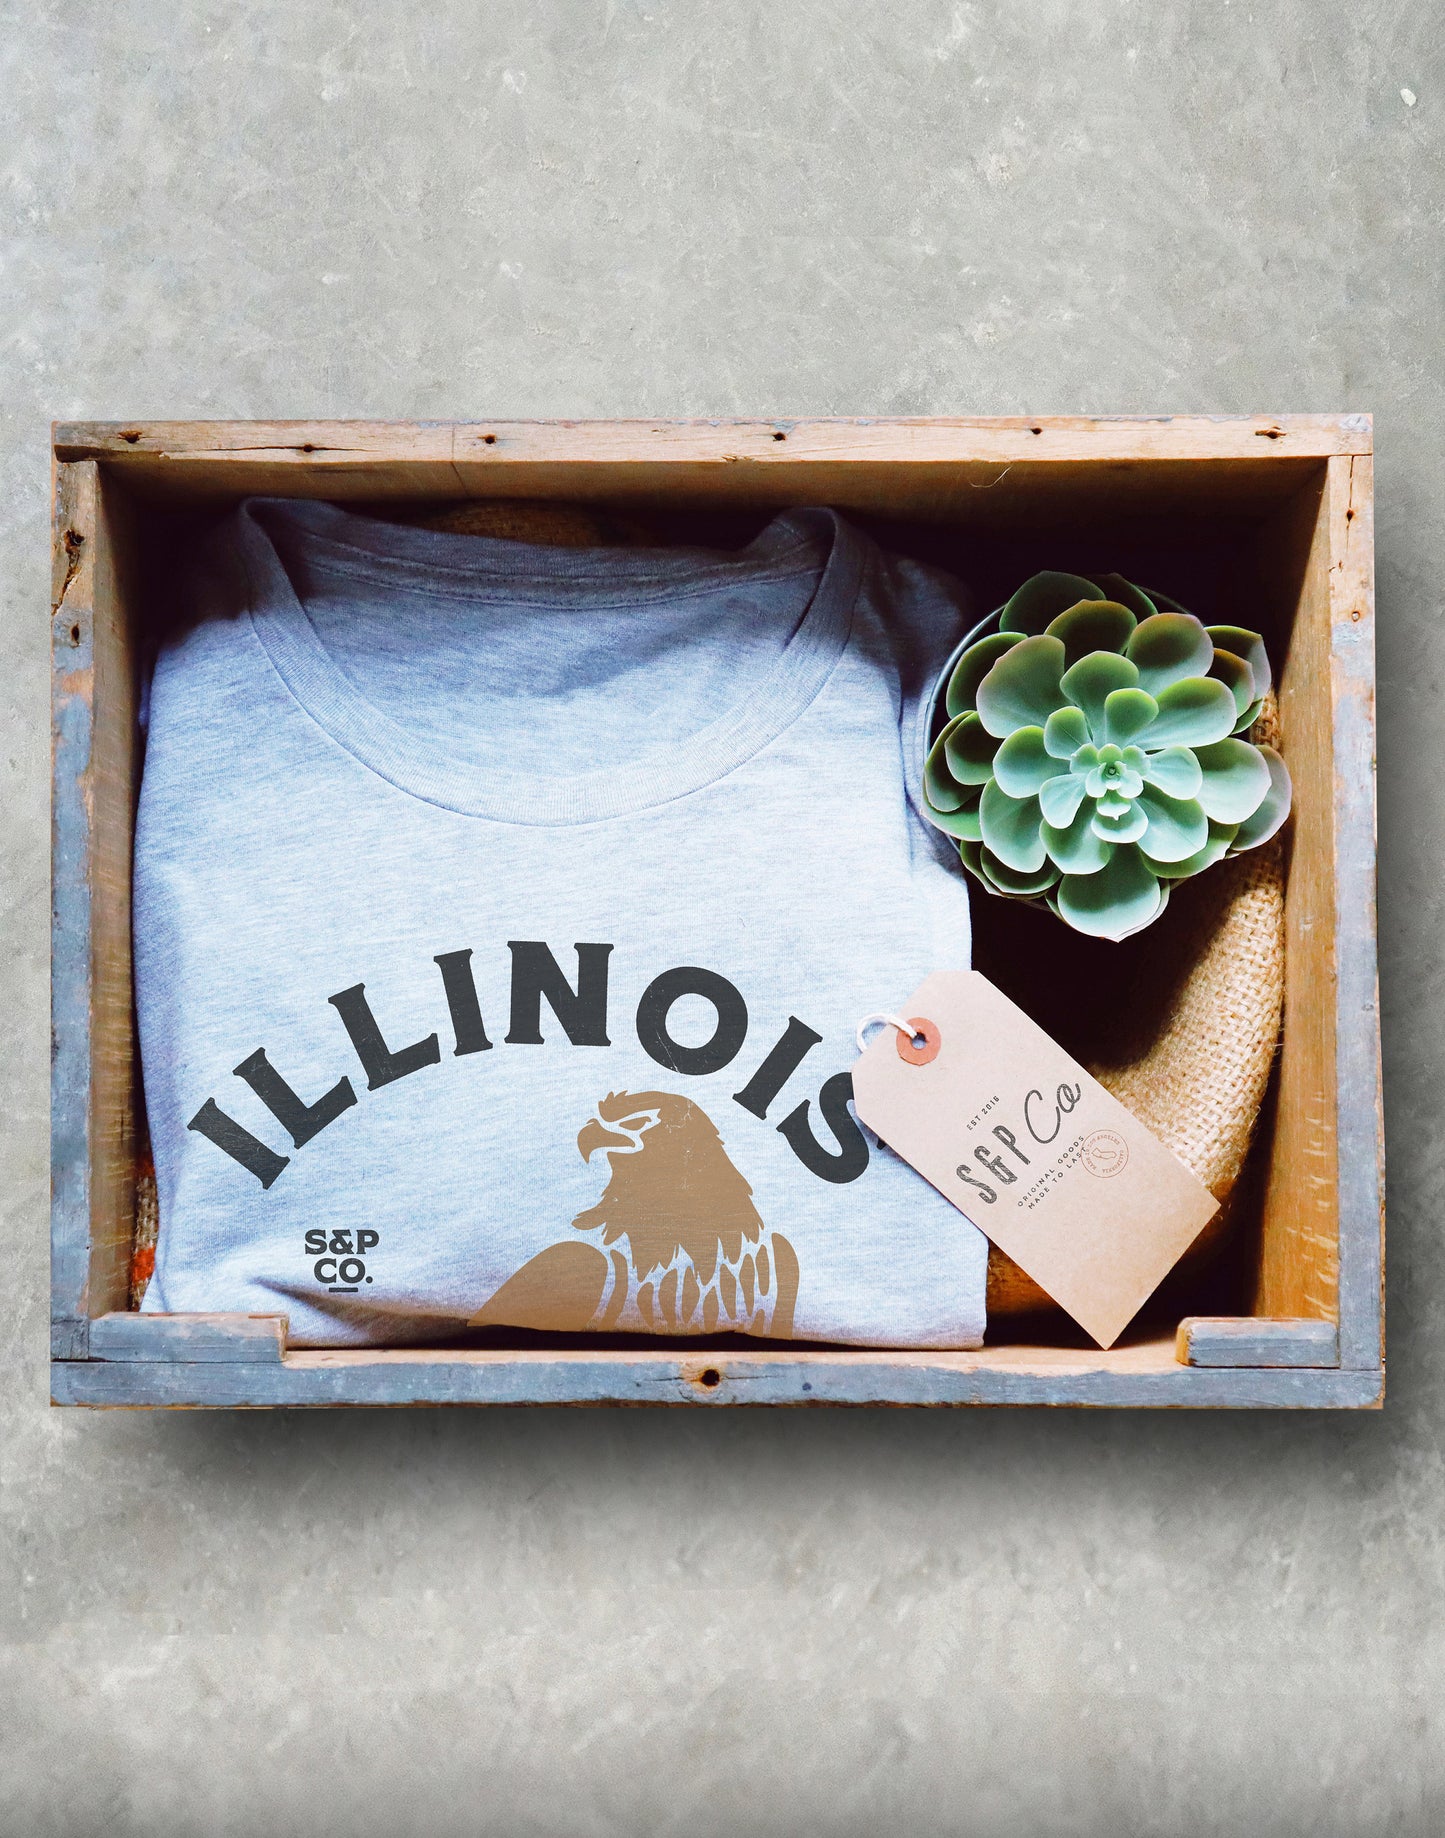 Illinois Unisex Shirt - Illinois Is Calling & I Must Go, Chicago Gift, Eagle Shirt, Prairie State T-Shirt, IL Home Tee, College Shirt